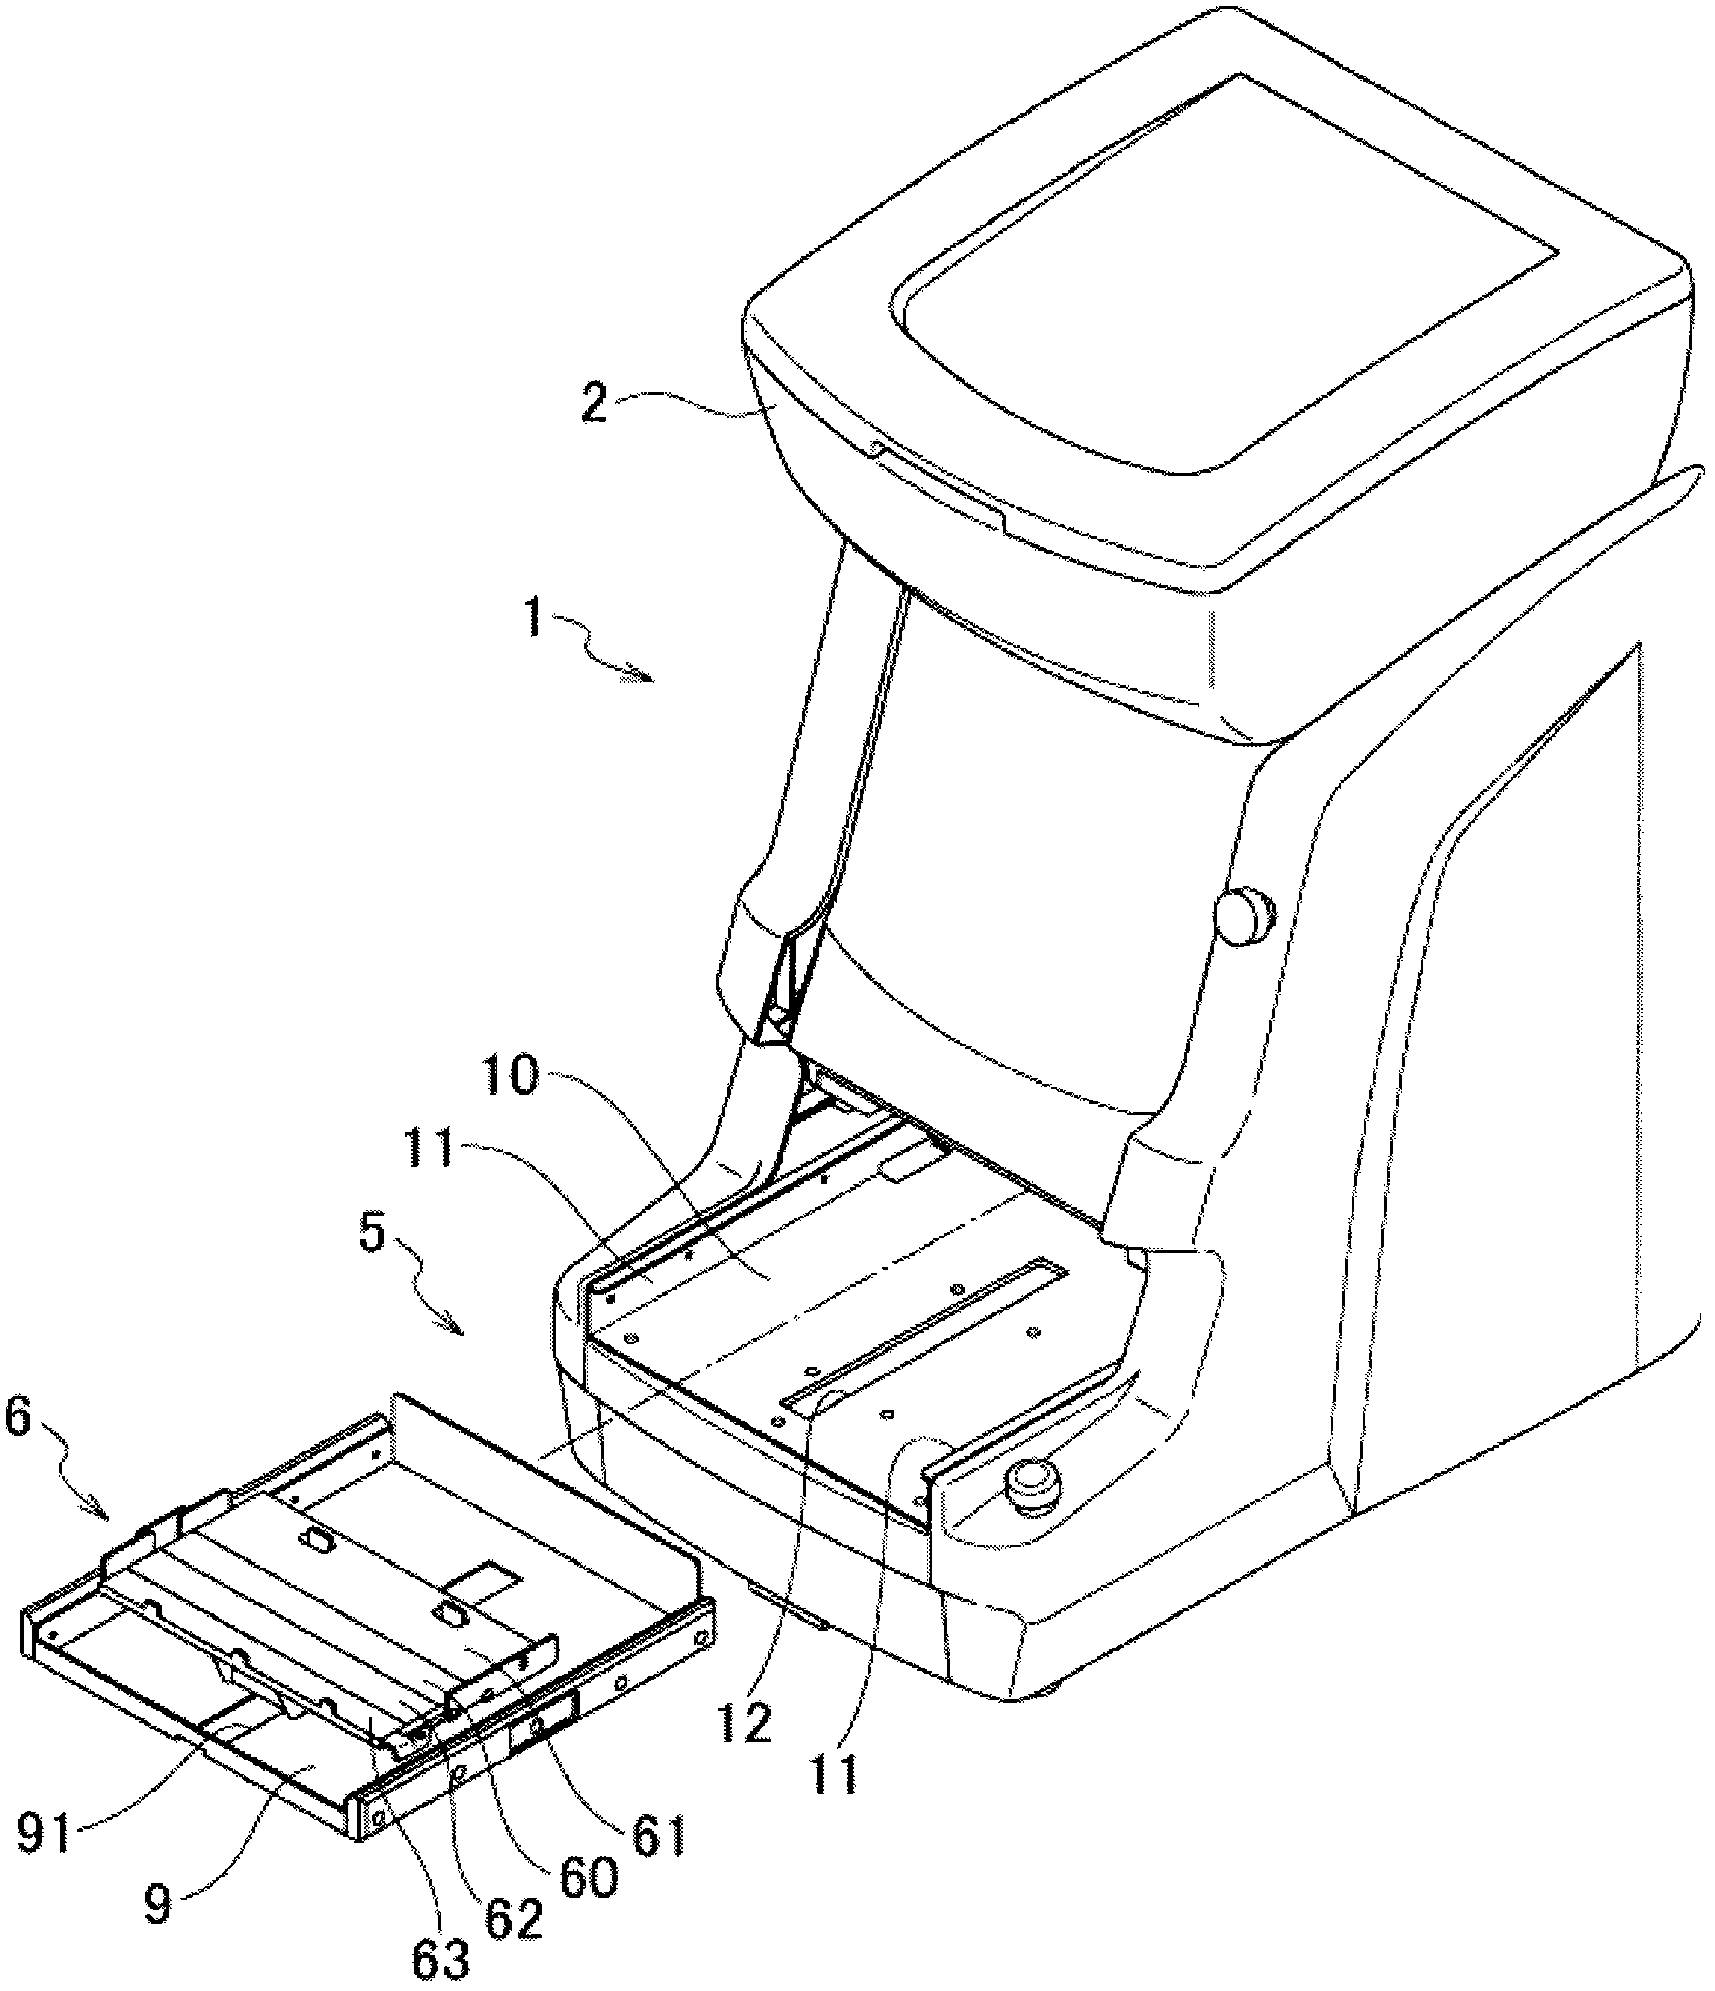 Food forming device